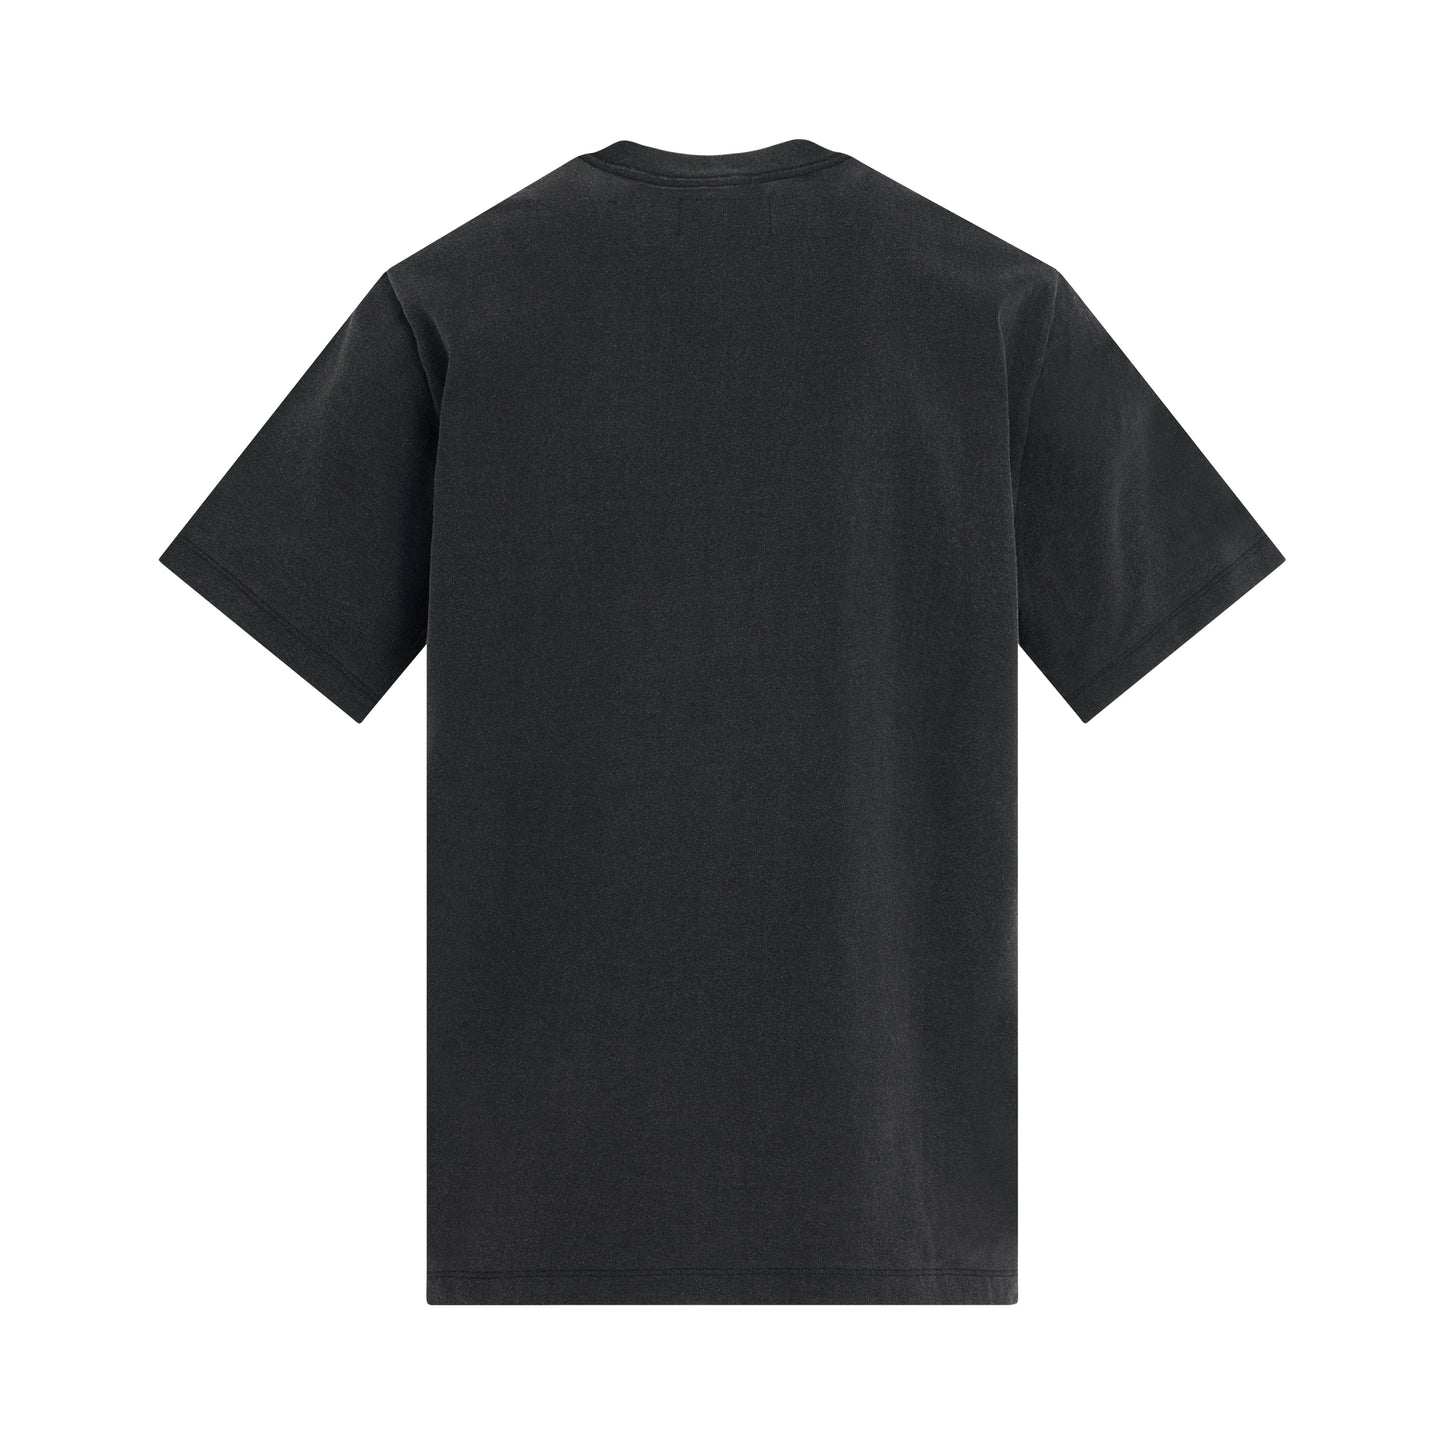 AI-Generated "Doublet" Logo T-Shirt in Black